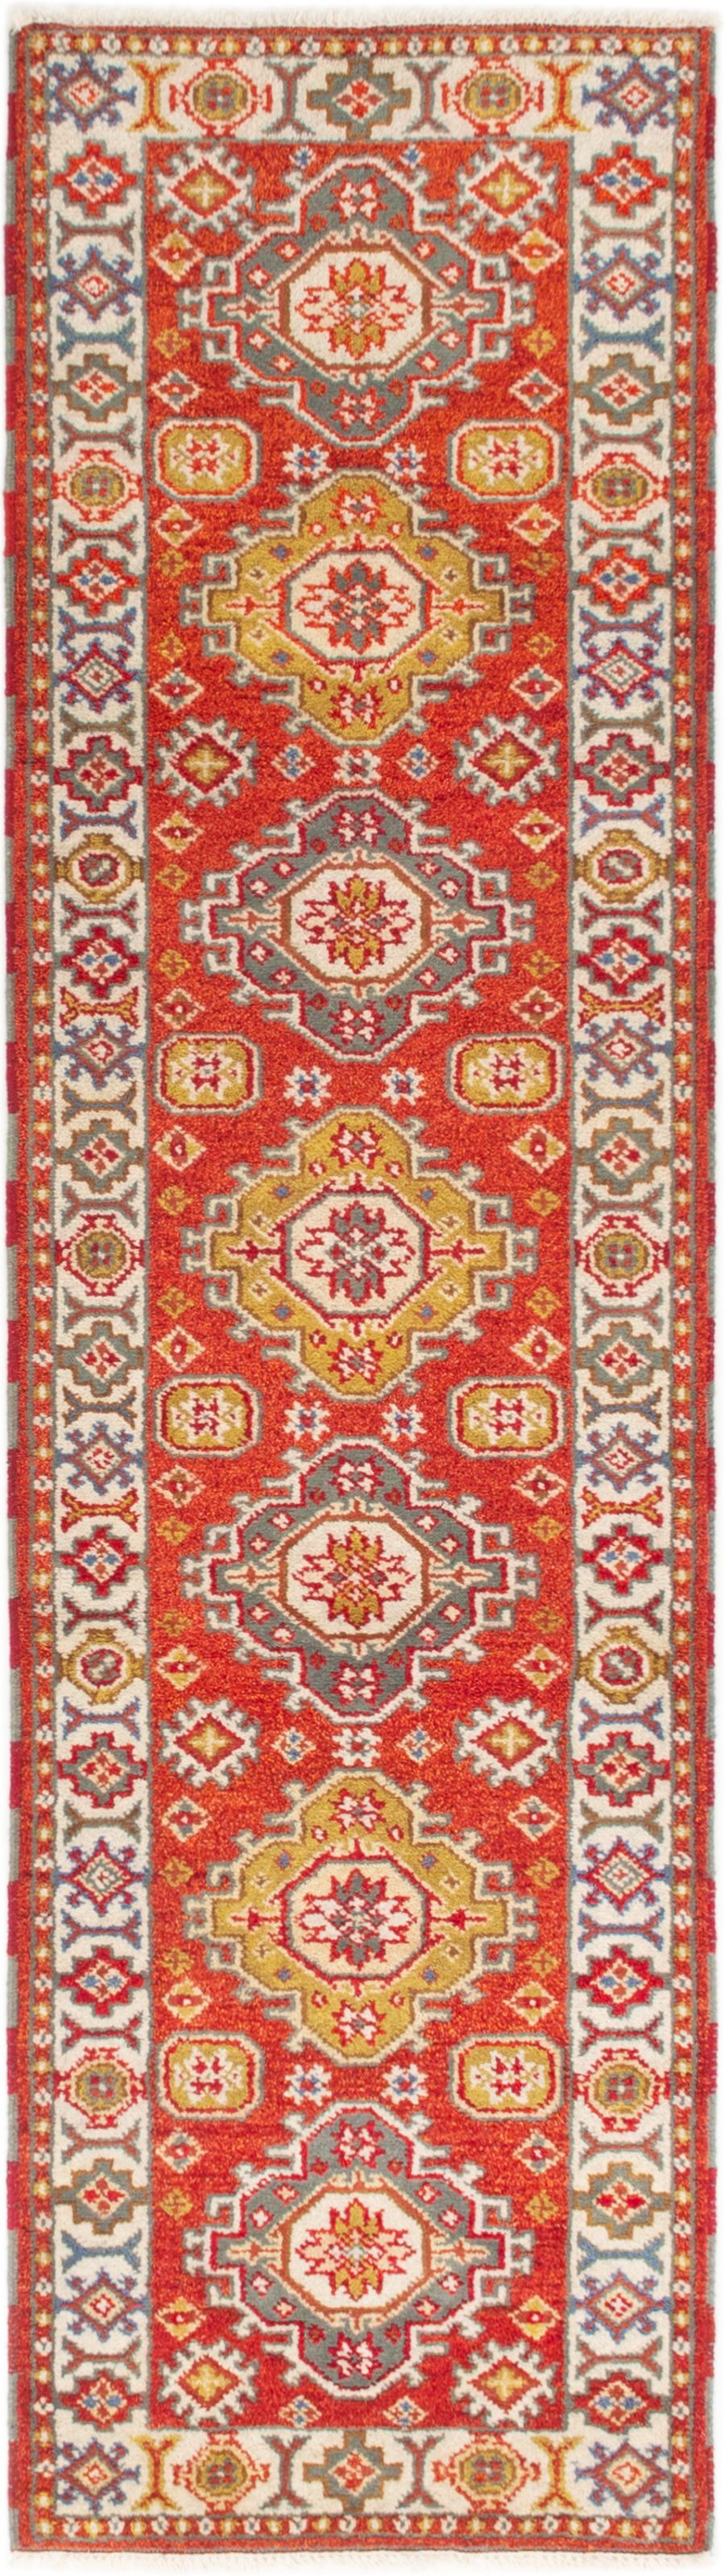 Hand-knotted Royal Kazak Red Wool Rug 2'9" x 10'1"  Size: 2'9" x 10'1"  